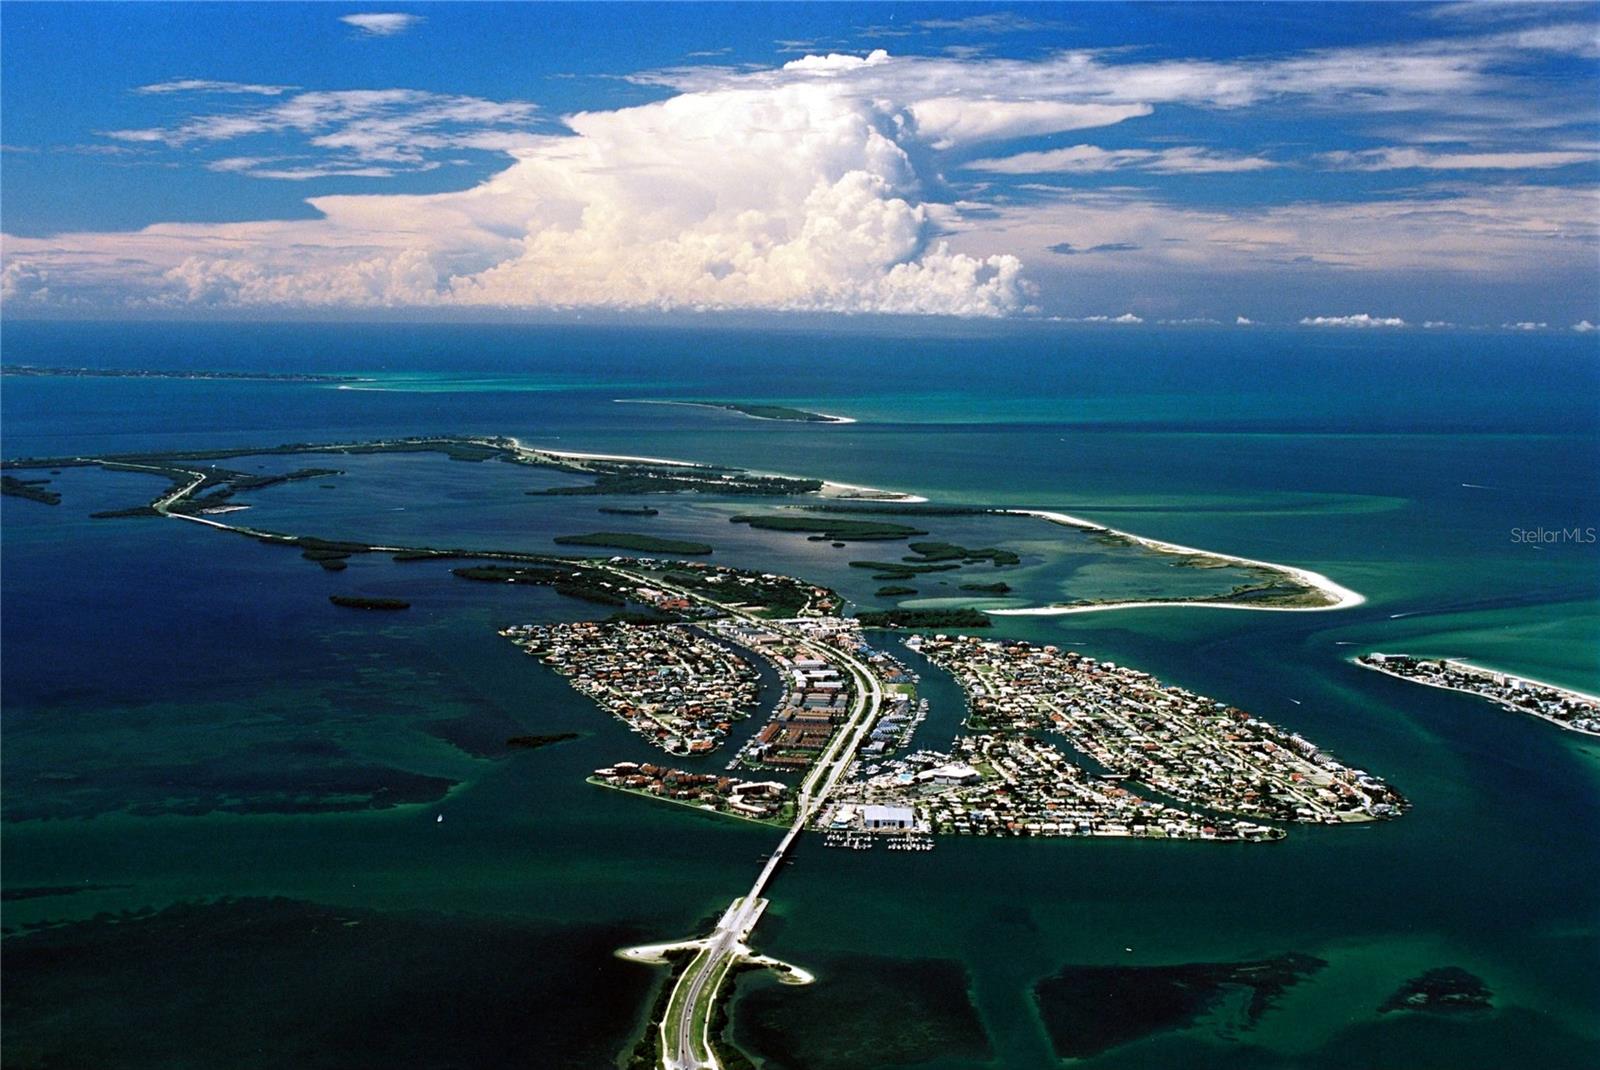 The name Tierra Verde means Green Land. This is an Island paradise! Its own community; Tierra Verde includes the famous Fort Desoto with over 20 miles of biking, beaches and boating! There are also recreational facilities for pickle ball, tennis - even a baseball field, a playground and their own fire department!